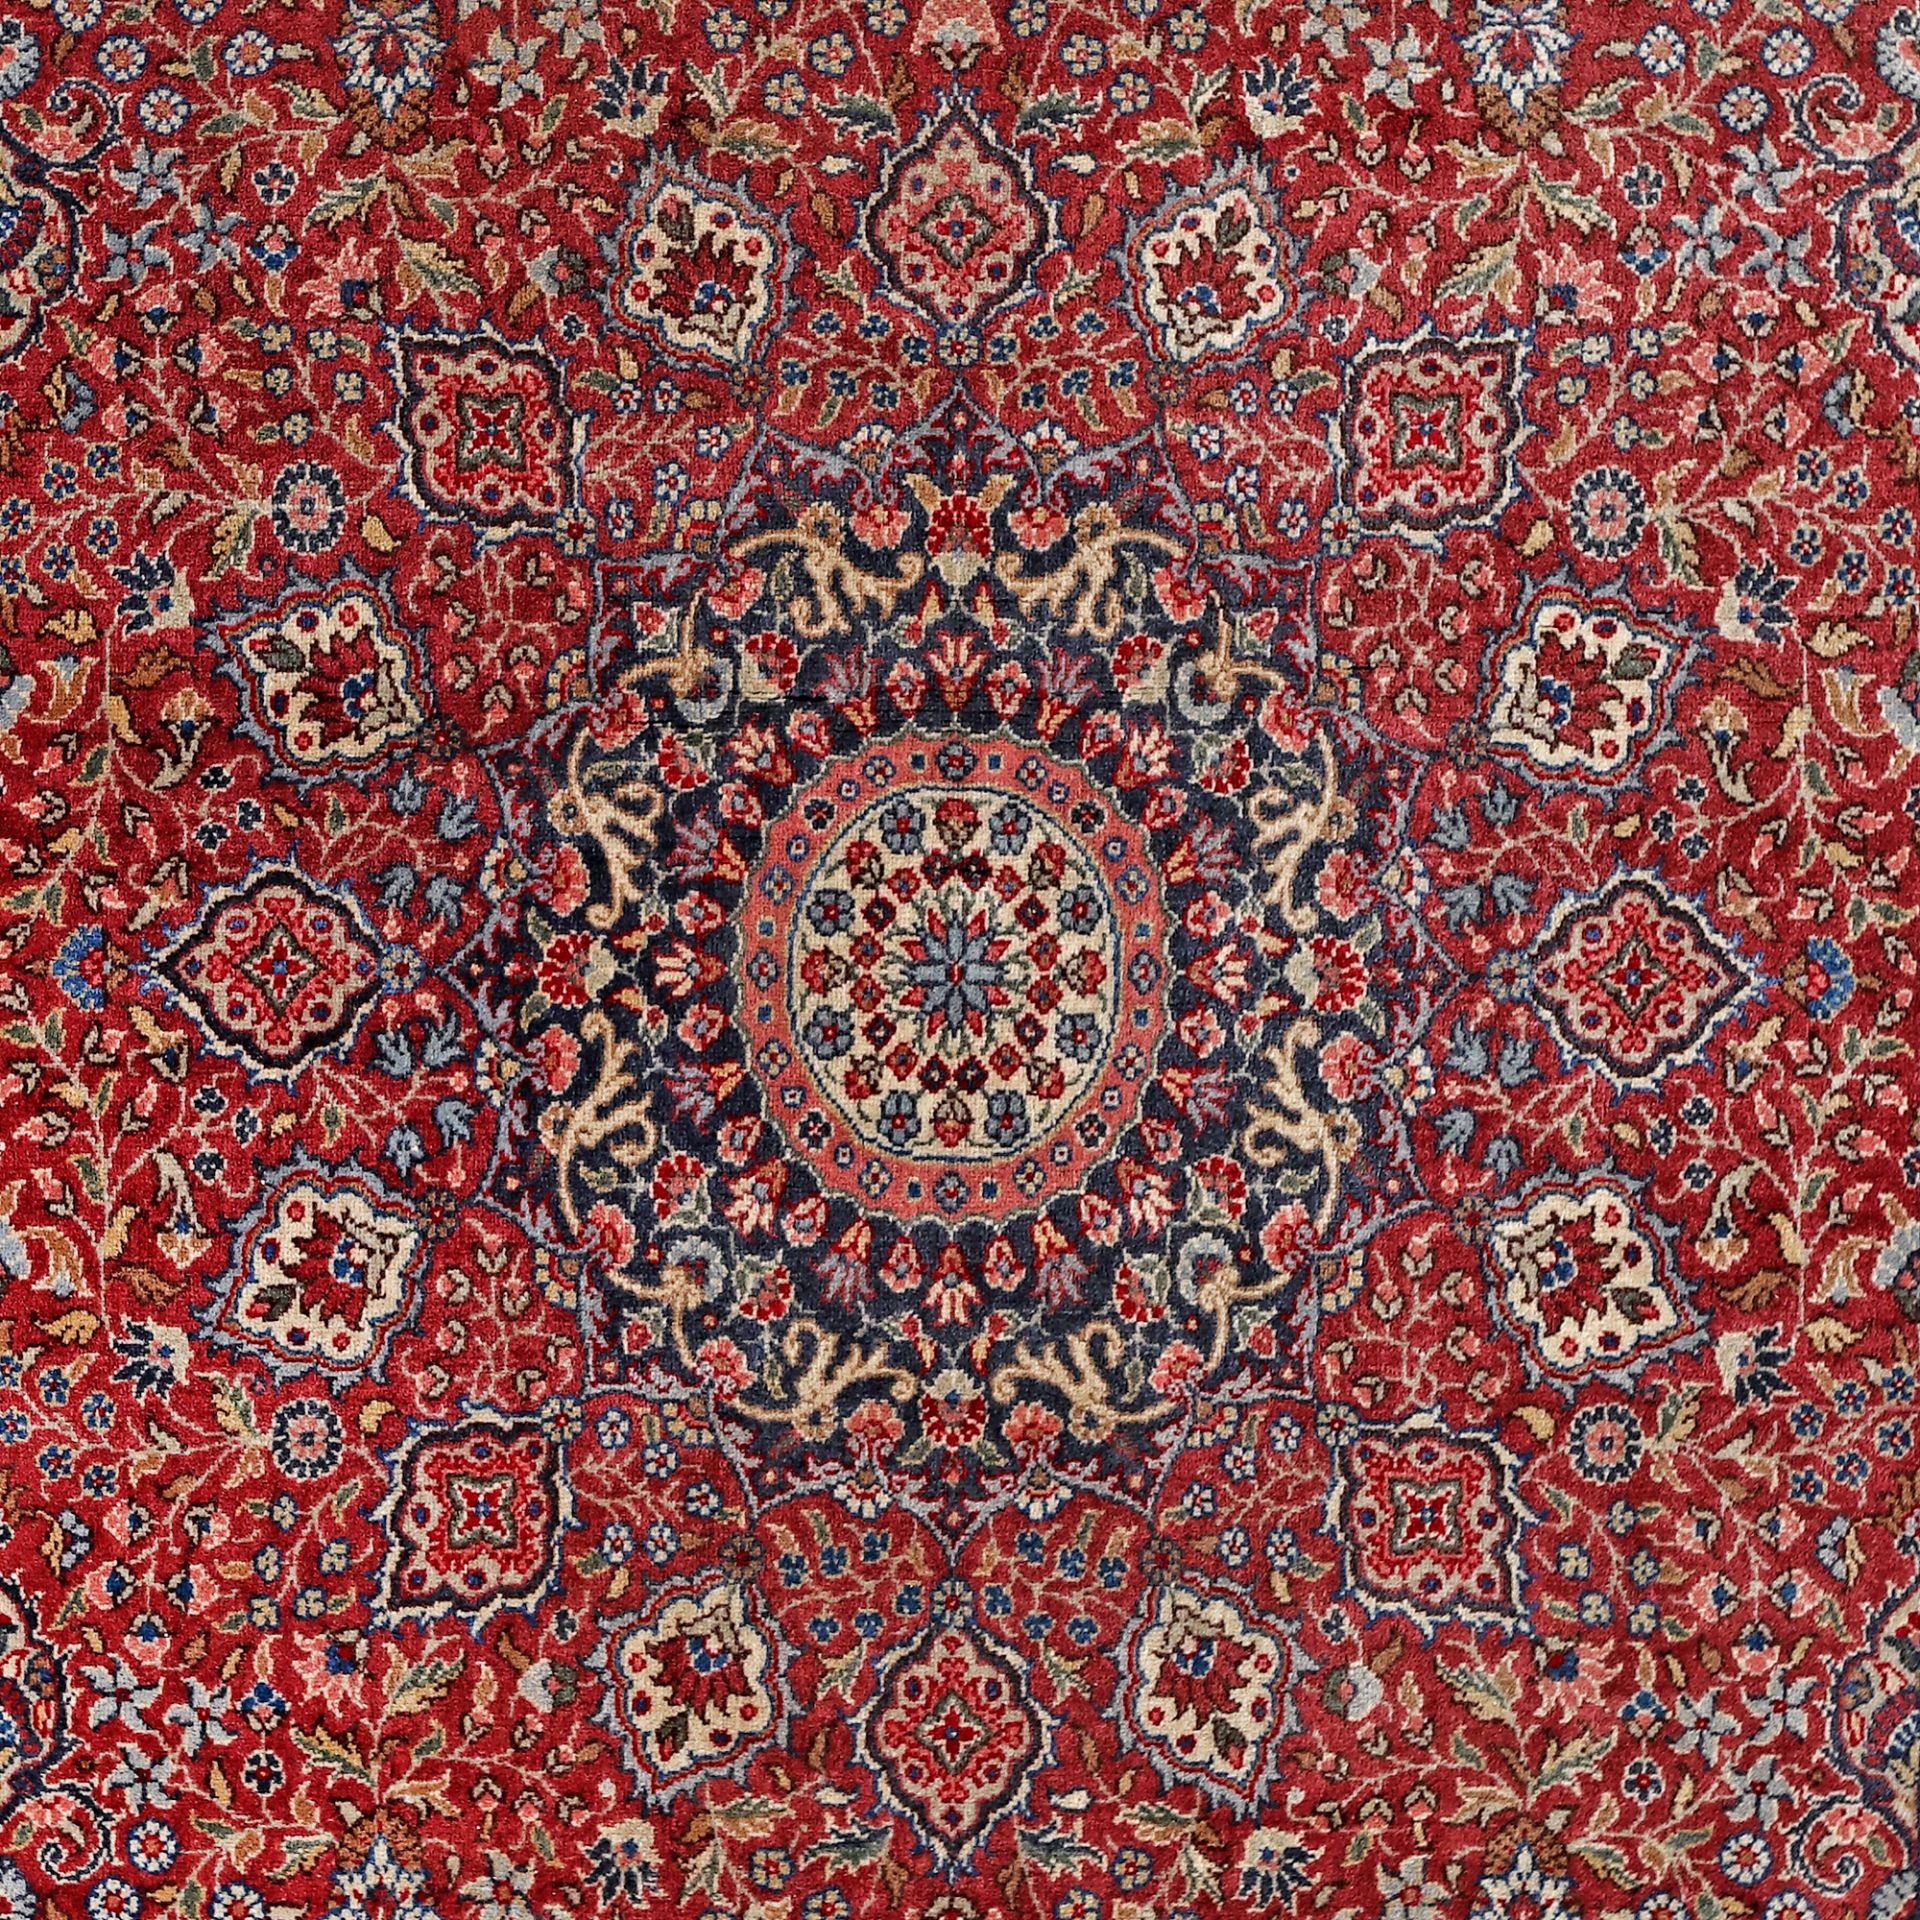 Tabriz wool rug, decorated with medallions and floral motifs specific to the area, approx. 1950 - Image 2 of 2